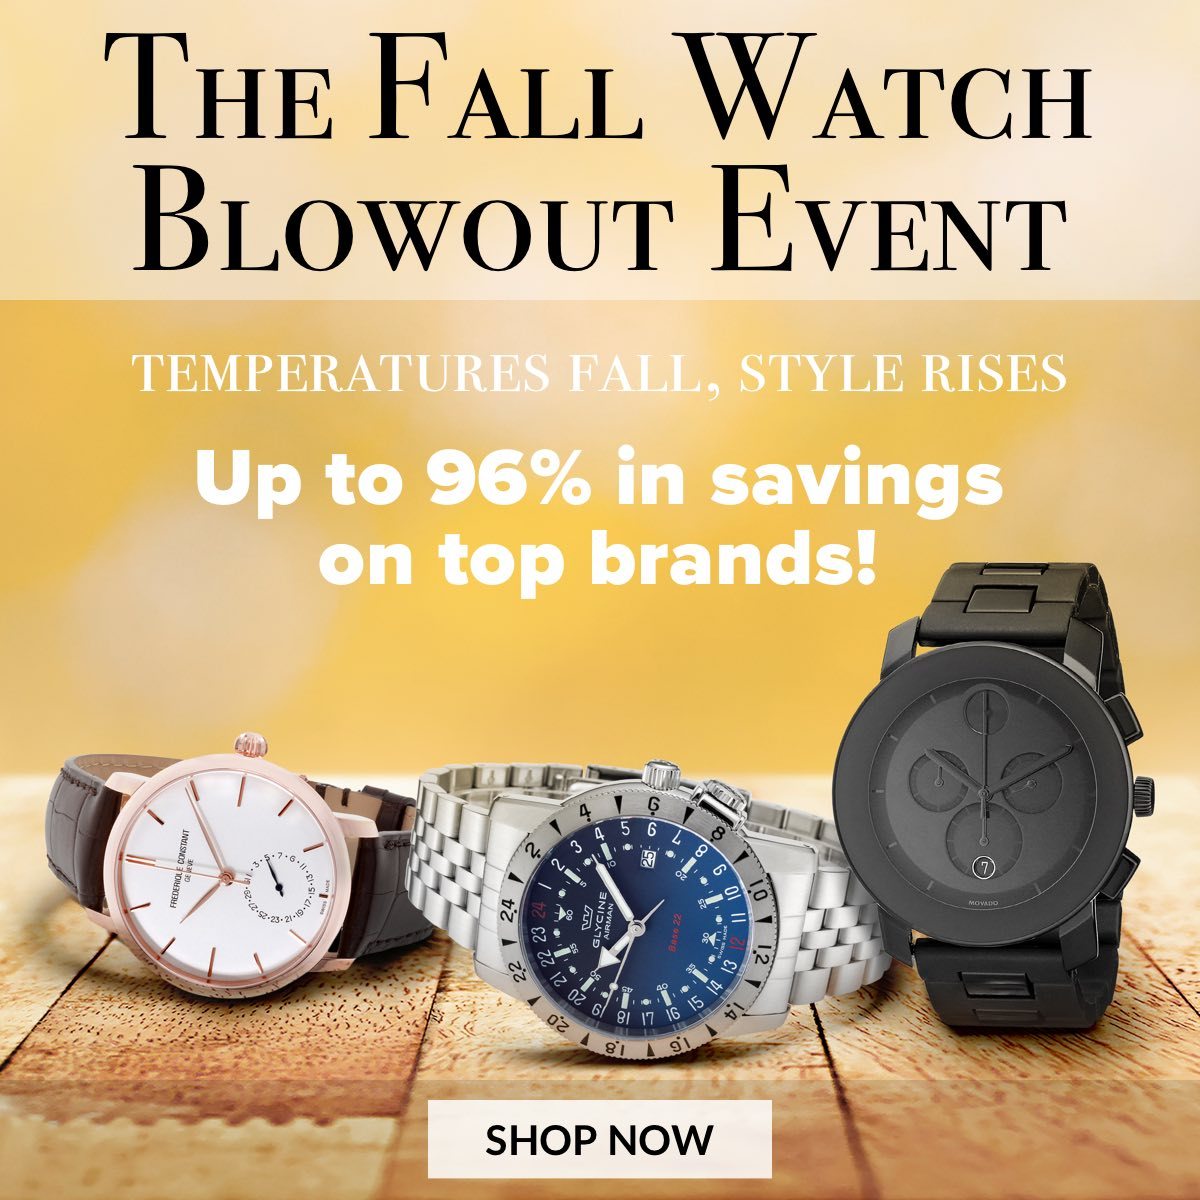 The Fall Watch Blowout Event Temperatures Fall, Style Rises Up to 96% in savings on top brands! 